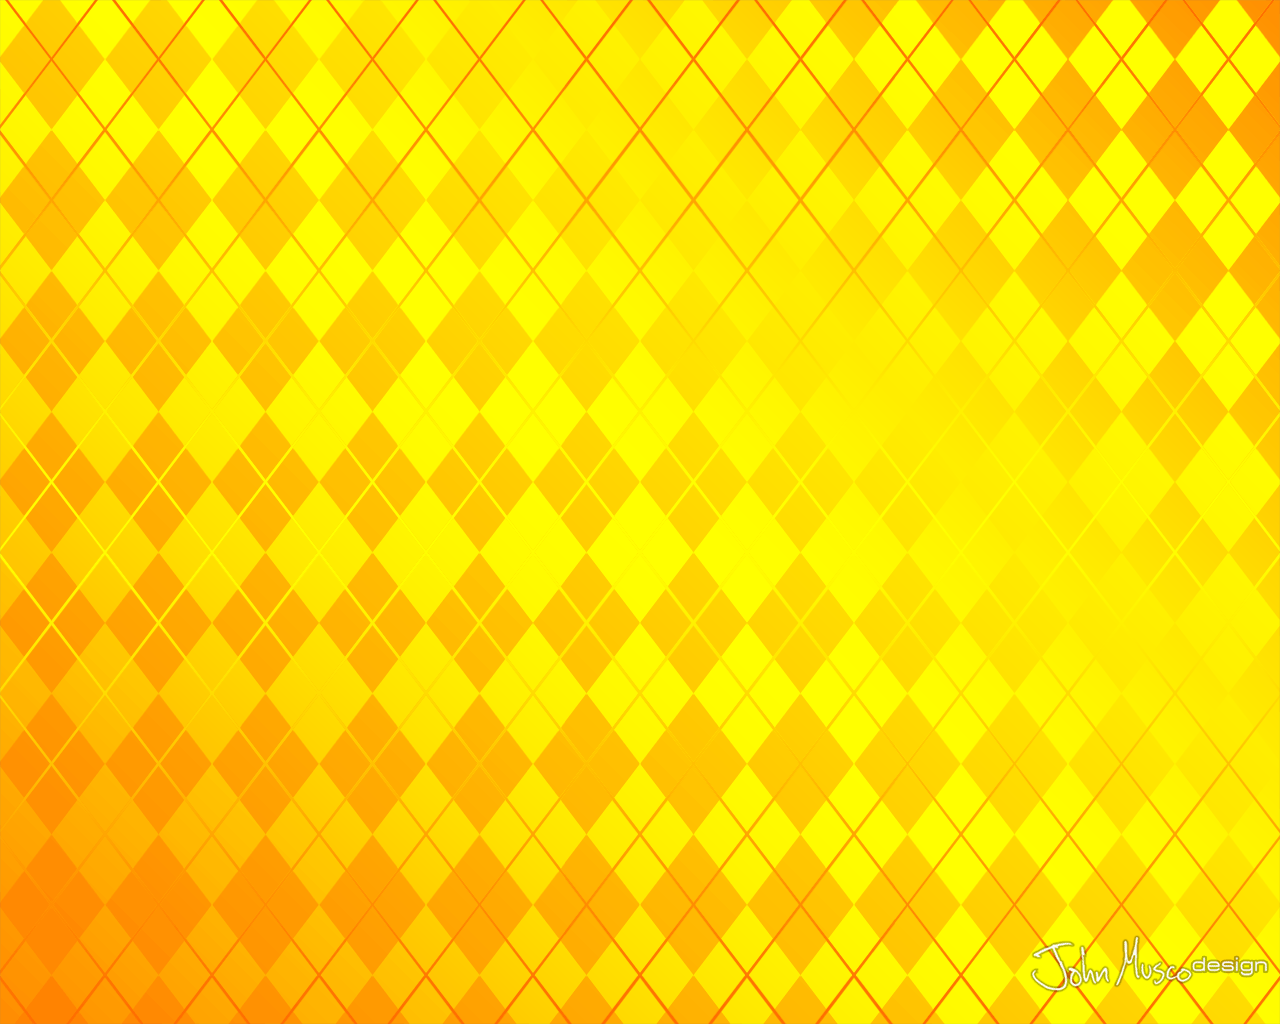 Yellow Backgrounds Designs HD Wallpapers on picsfaircom